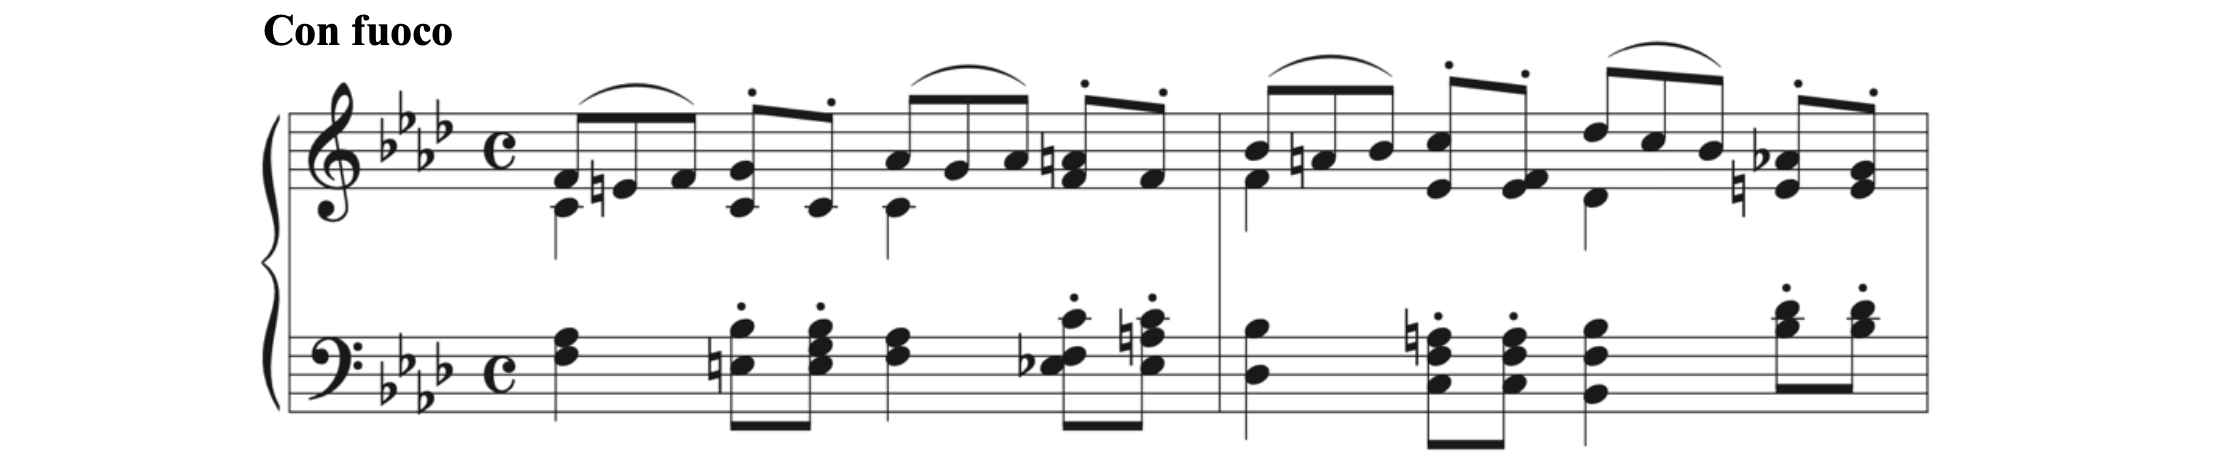 Implied triplets: Le Beau, Theme and Variations, op. 3, no. 7. Although there is no number 3, triplets are implied.